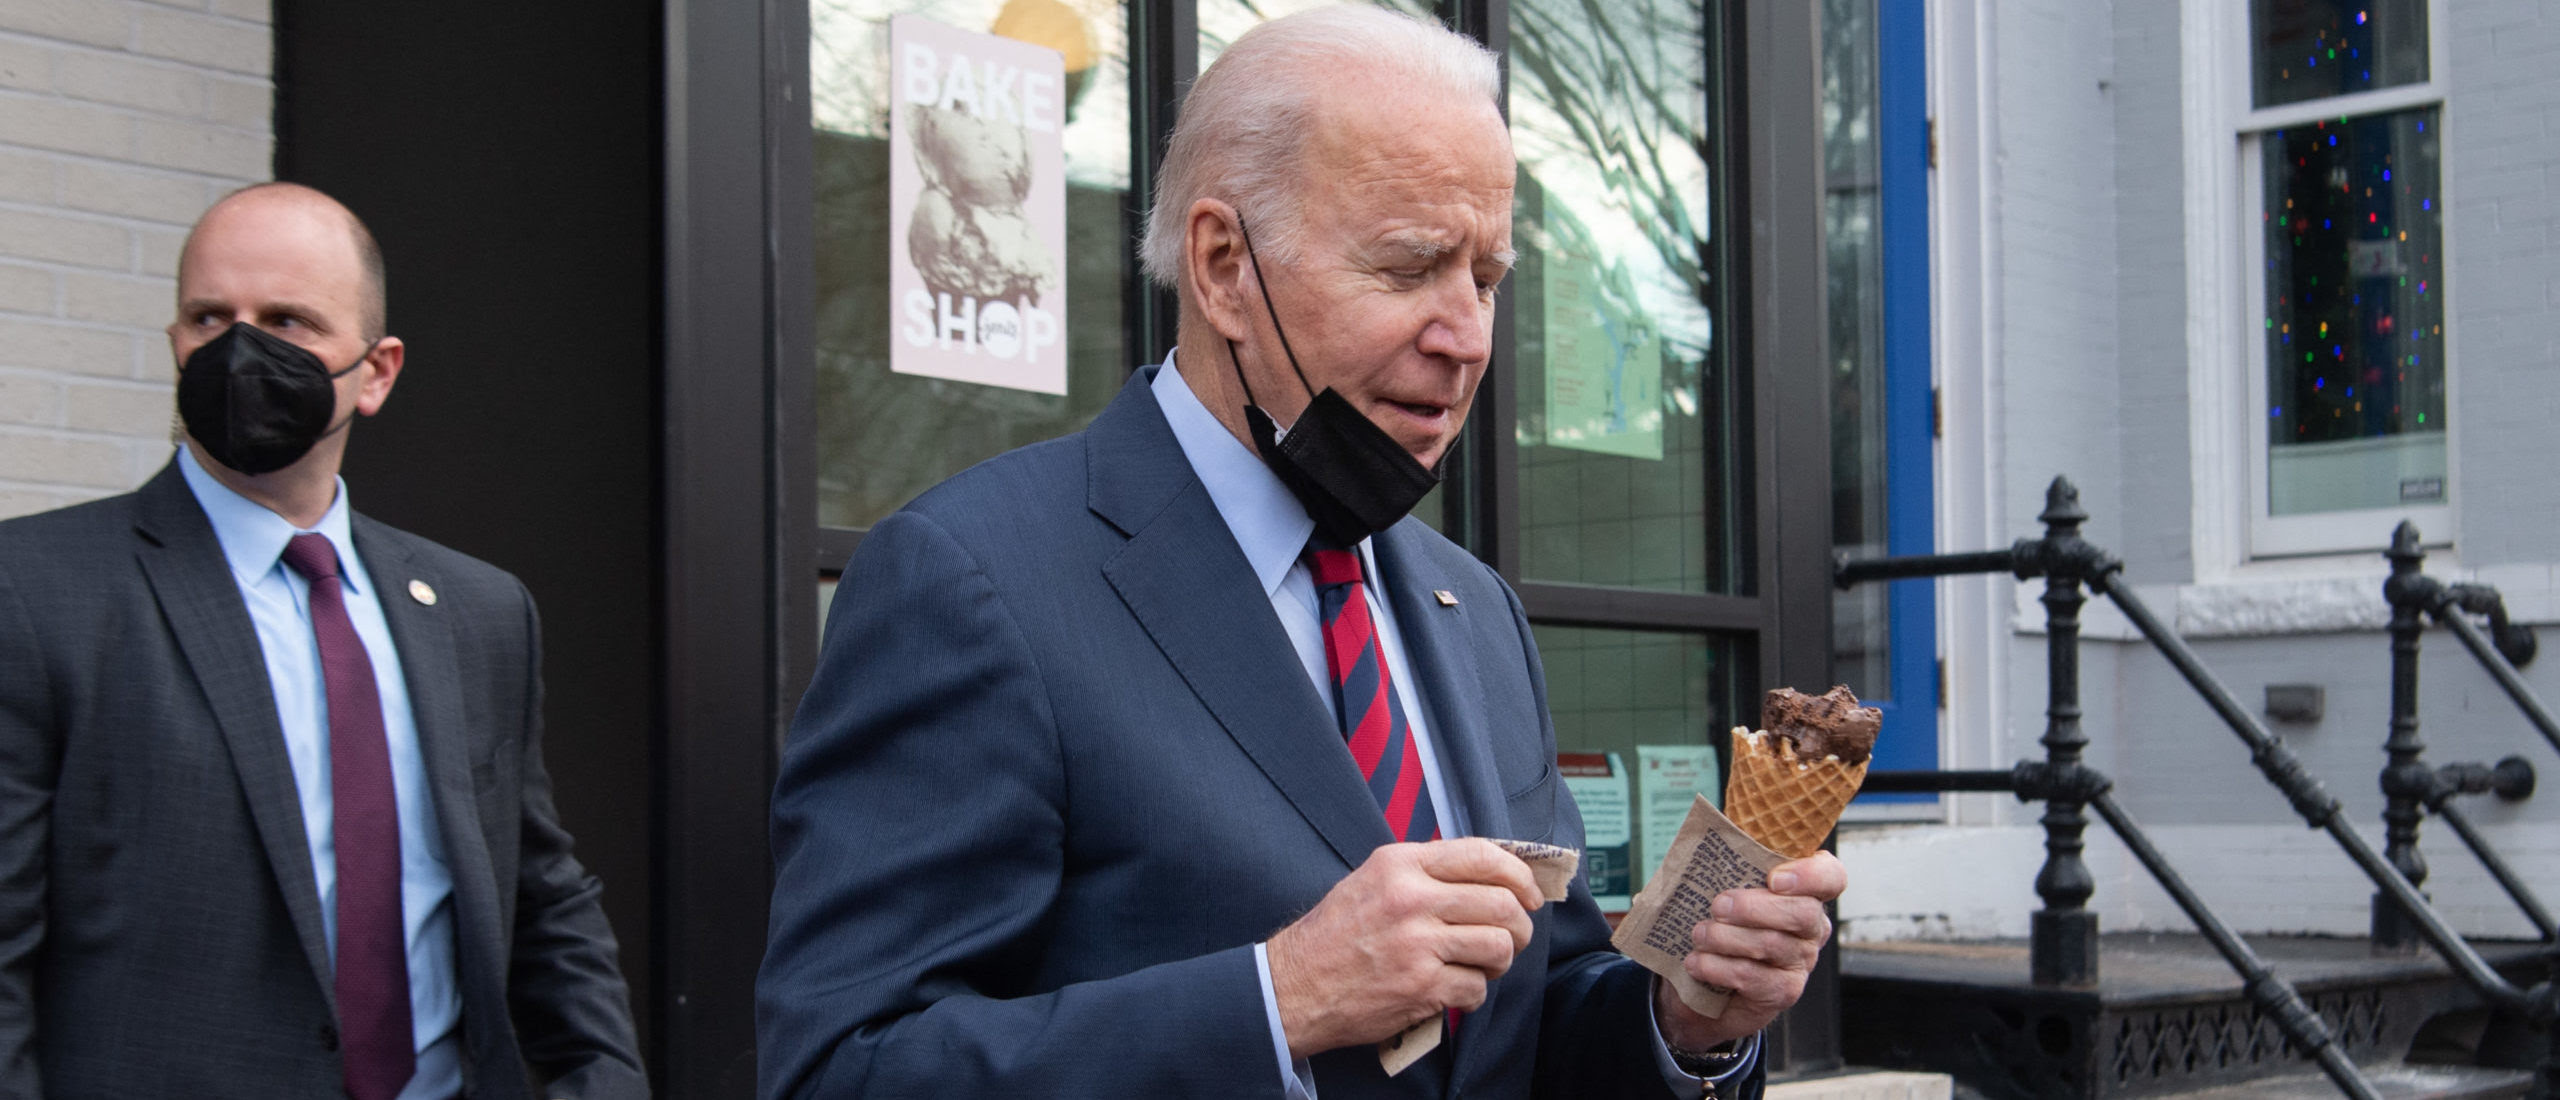 ‘Cut Off The Head Of The Snake’: Two Men Charged For Threatening To Kill Joe Biden